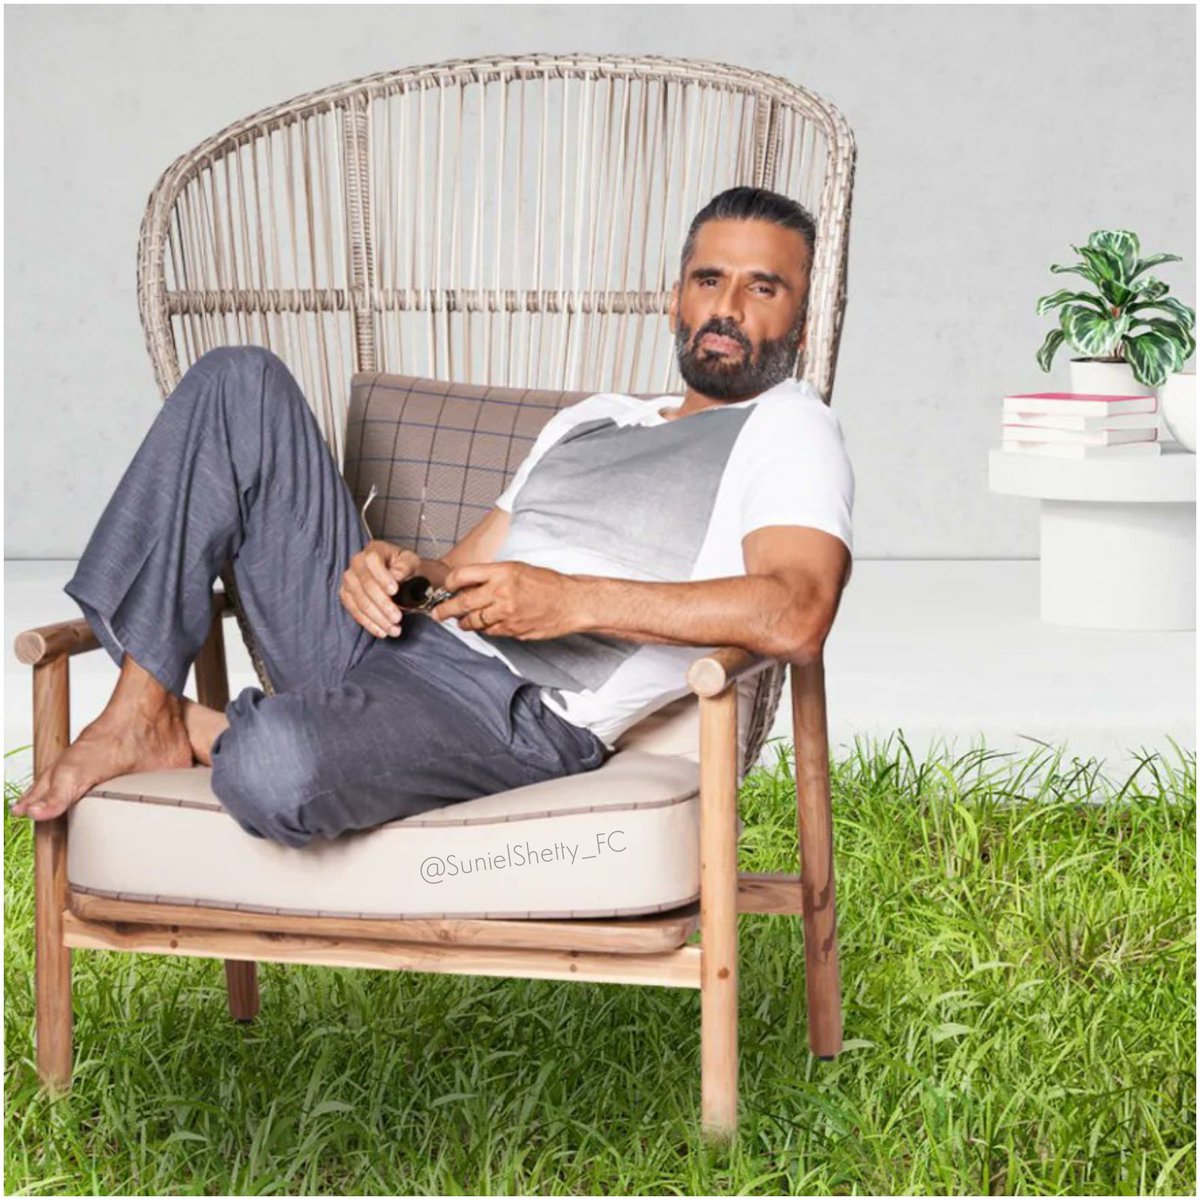 The Greener the Setting, The more the relief....
@SunielVShetty Sir ..❤️❤️
@LazeLifestyle 
#SunielShetty #Nature